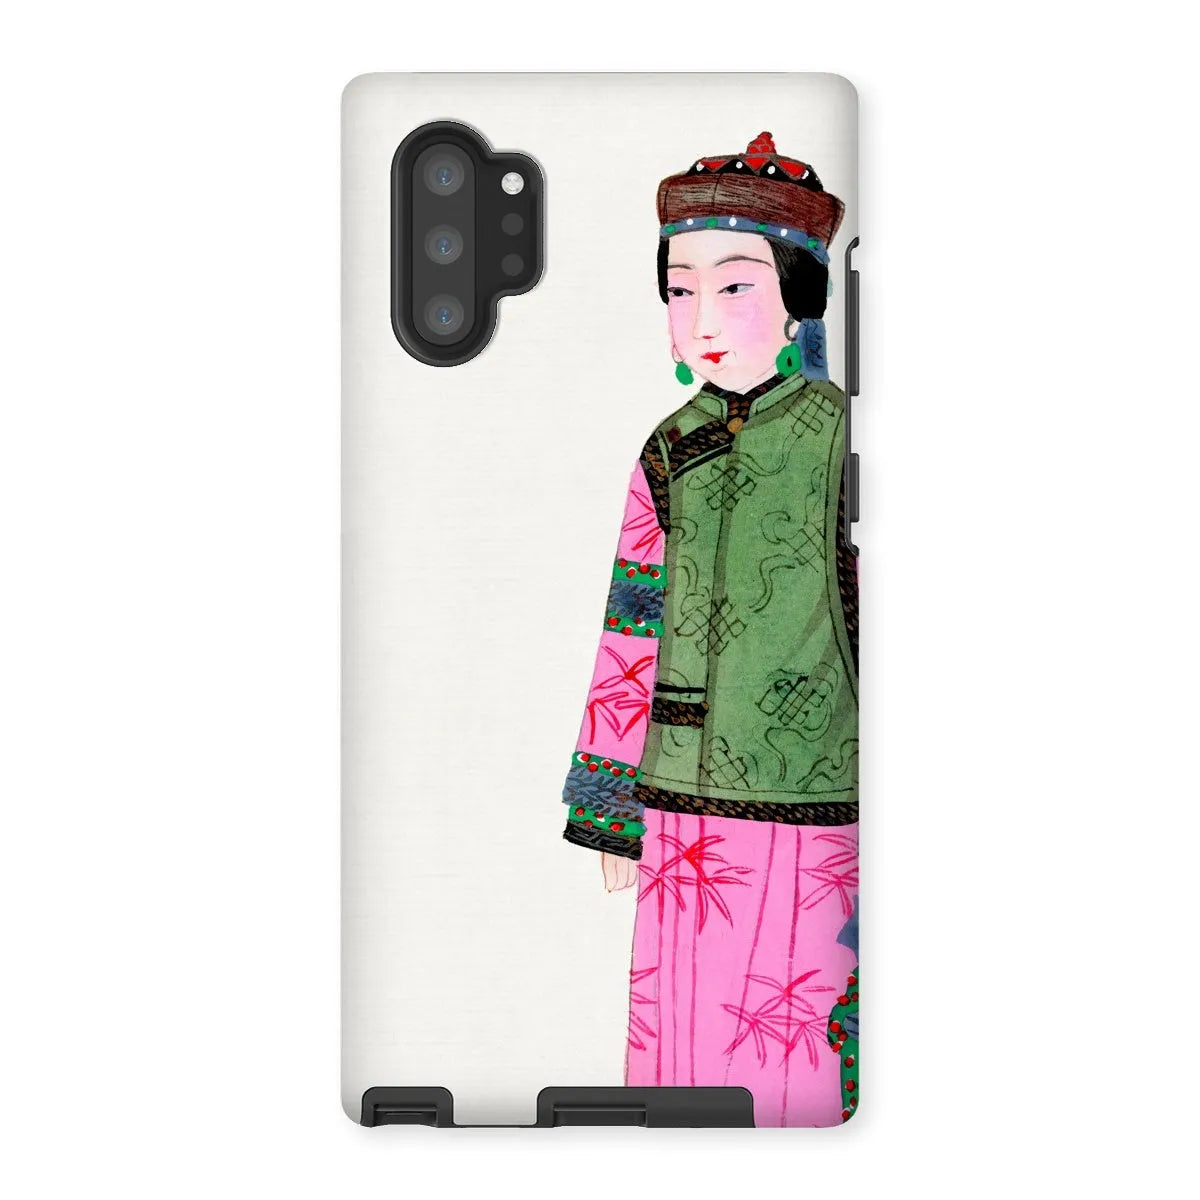 Noblewoman In Winter - Chinese Aesthetic Art Phone Case - Samsung Galaxy Note 10p / Matte - Mobile Phone Cases